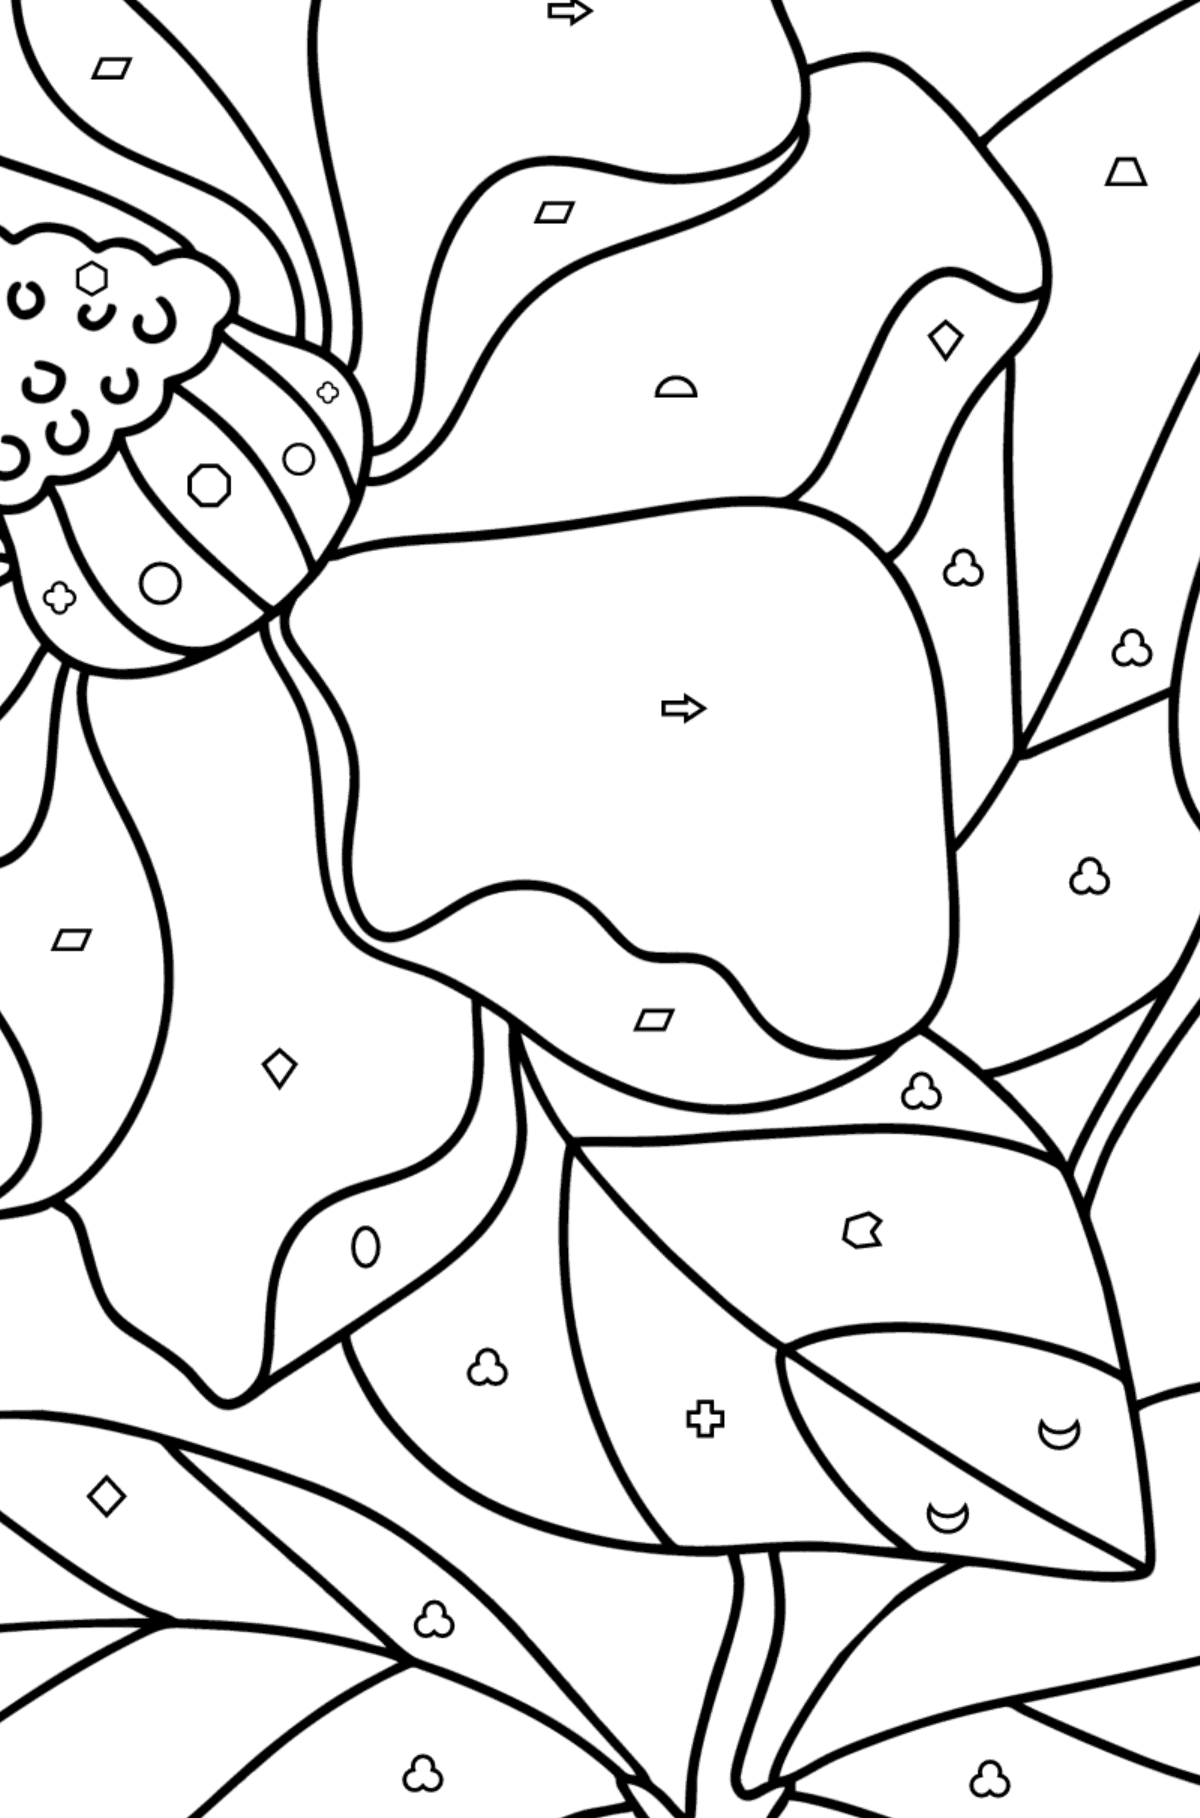 Magnolia coloring page - Coloring by Geometric Shapes for Kids